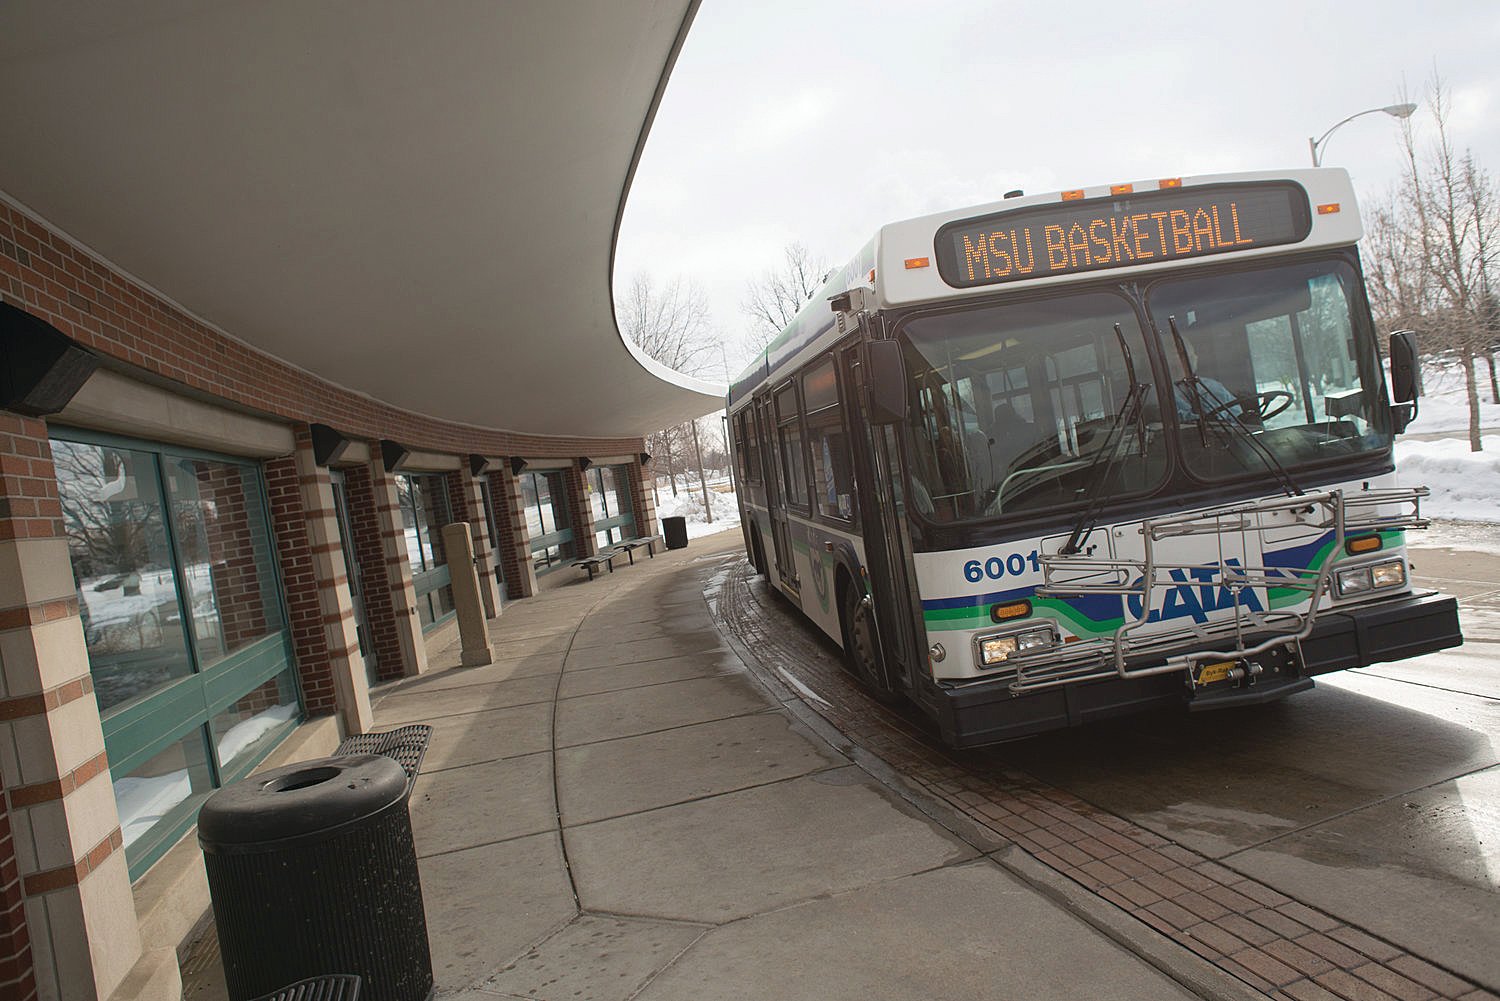 CATA requires passengers to wear face masks on its buses in accordance with a federal order. Drivers, however, have been instructed to “avoid confrontation” with riders, CATA officials said.